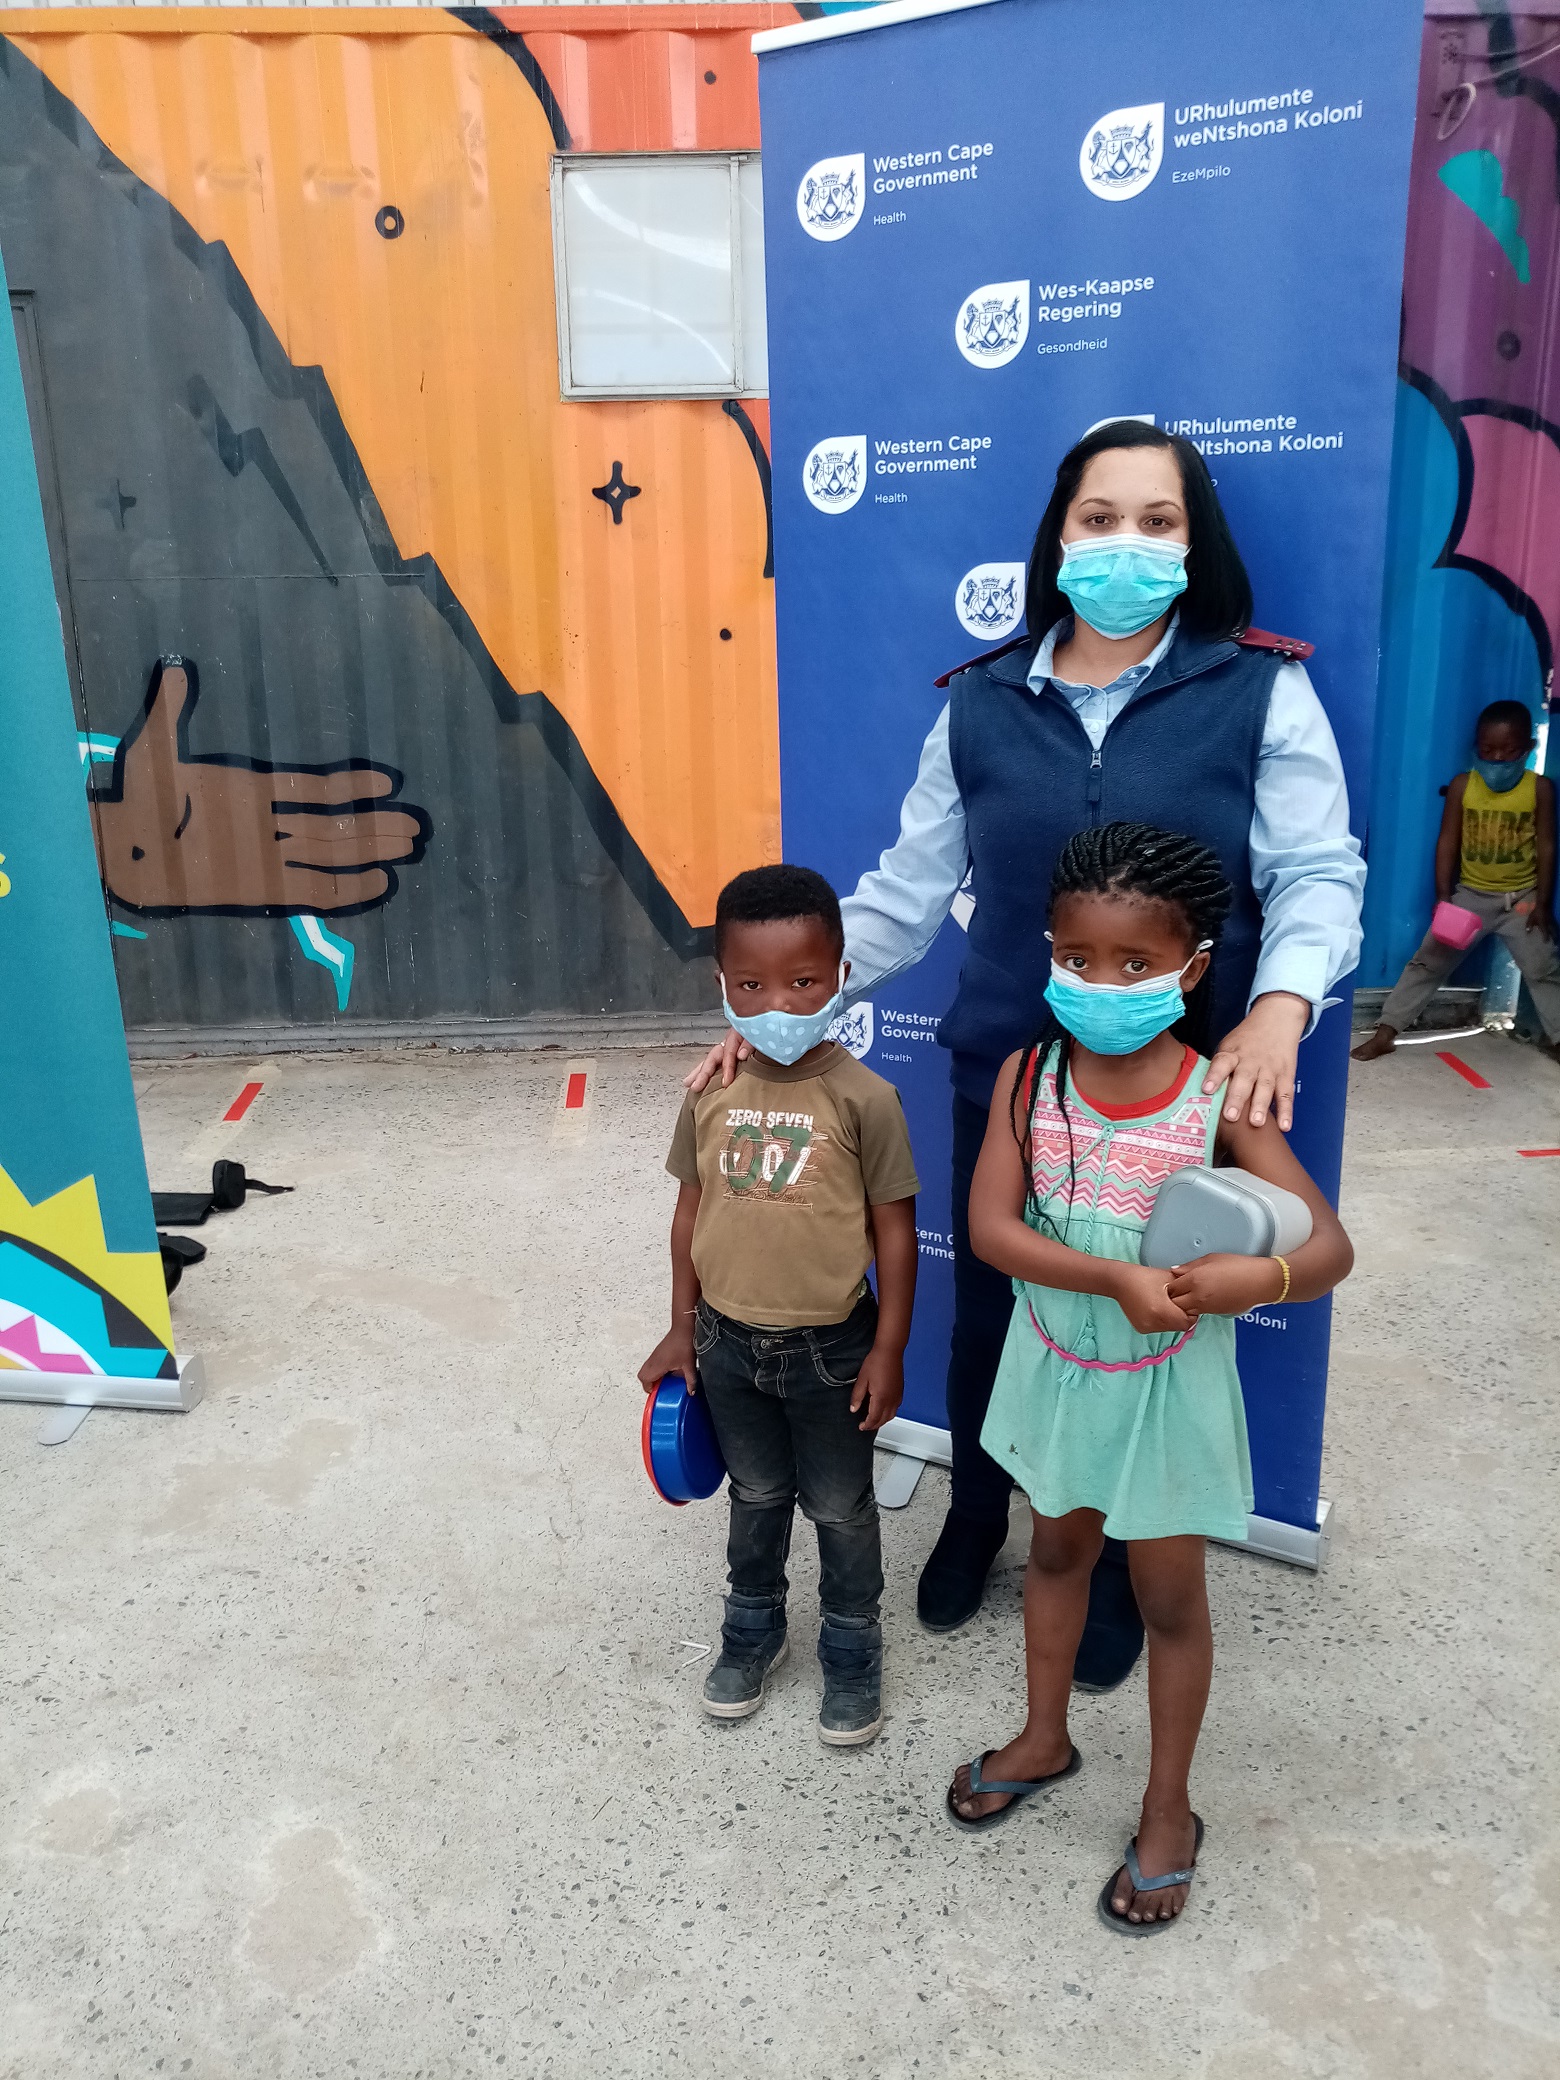 Sister Le-anne Valentyn assisted with handing out masks in klipheuwel